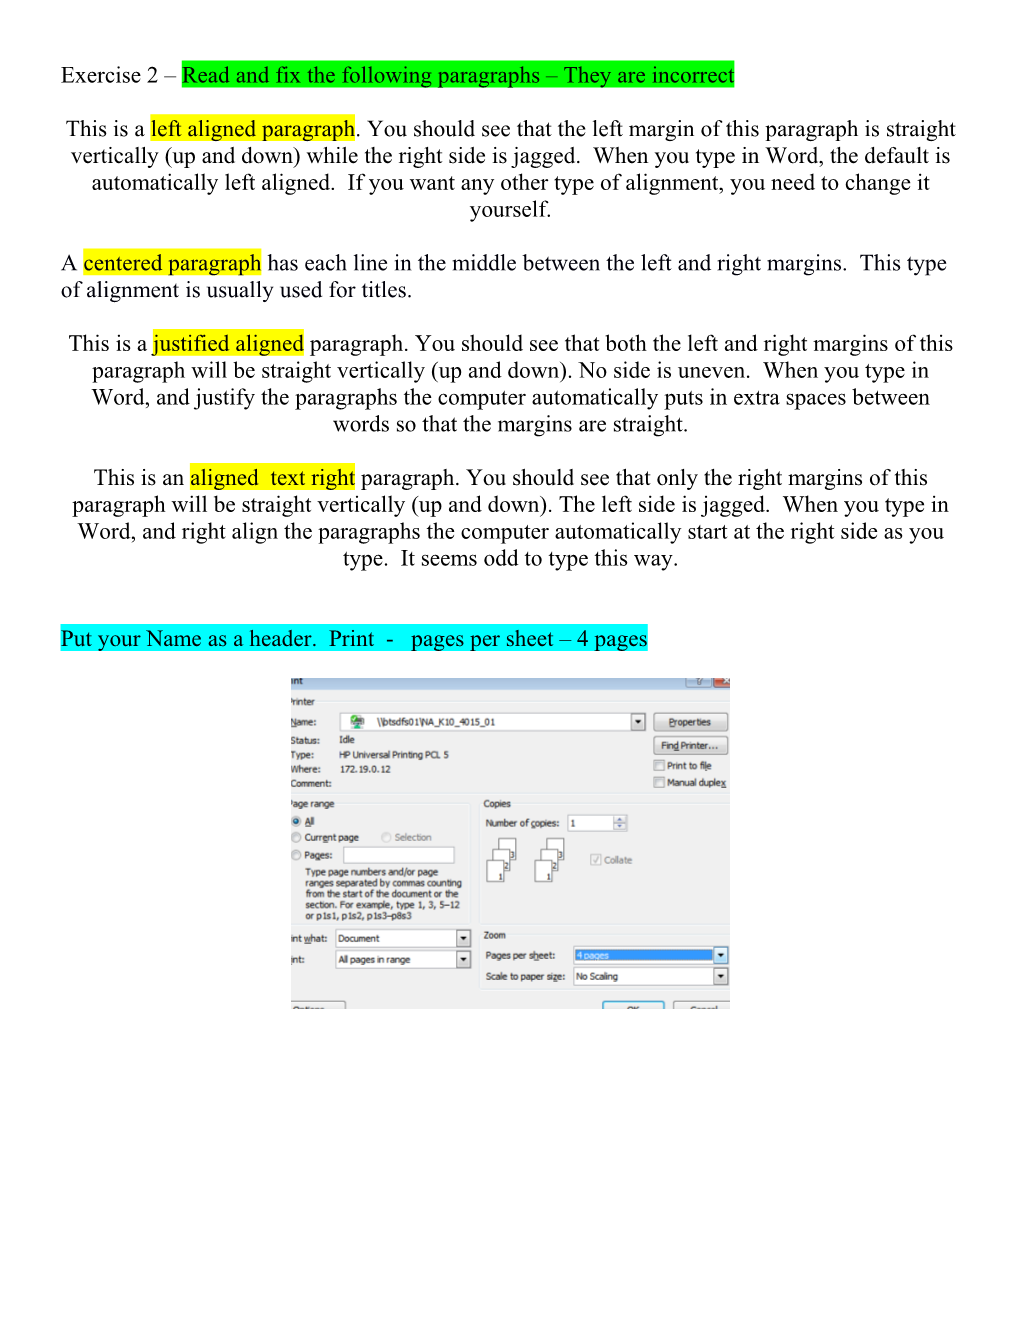 Once You Have Typed In Your Text In Word, You Begin To Work On The Document’S Appearance